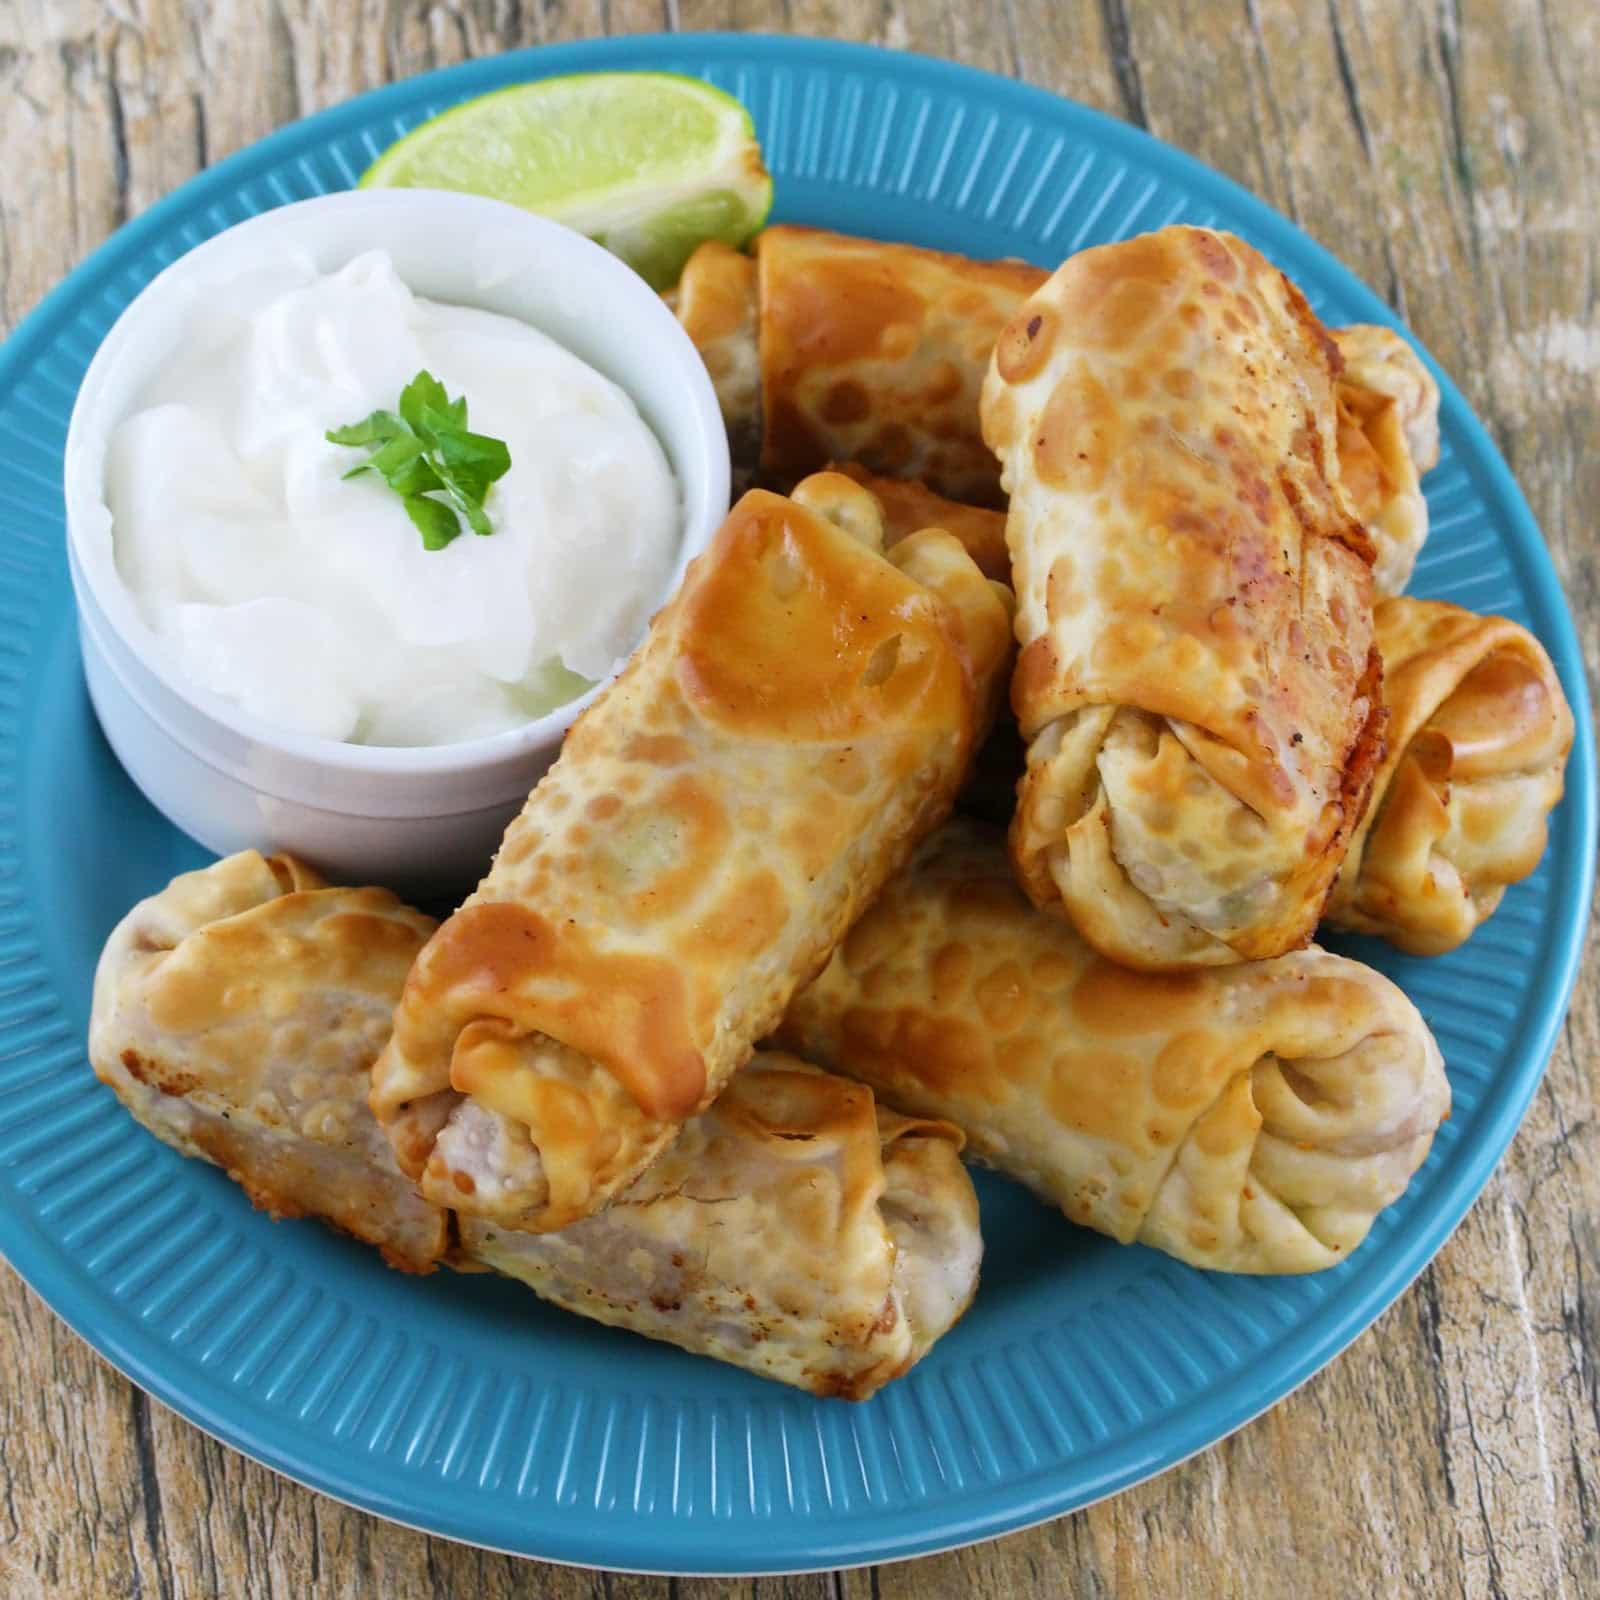 A stack of Mexican egg rolls on a blue plate with a side of sour cream